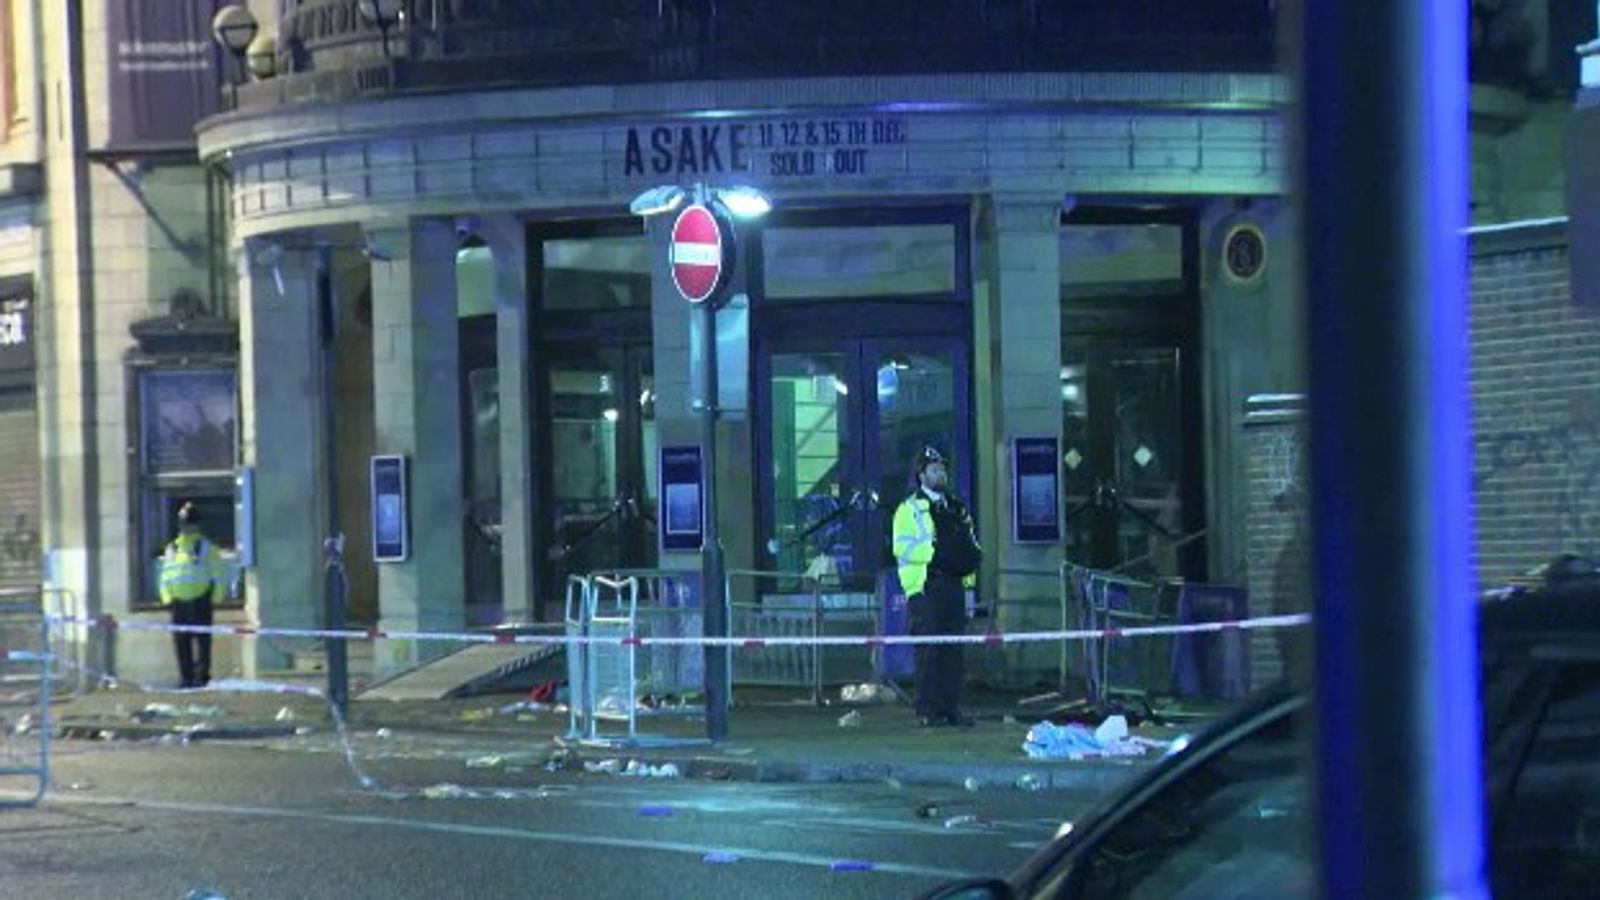 Four people in critical condition after crowd trouble at Asake concert in Brixton